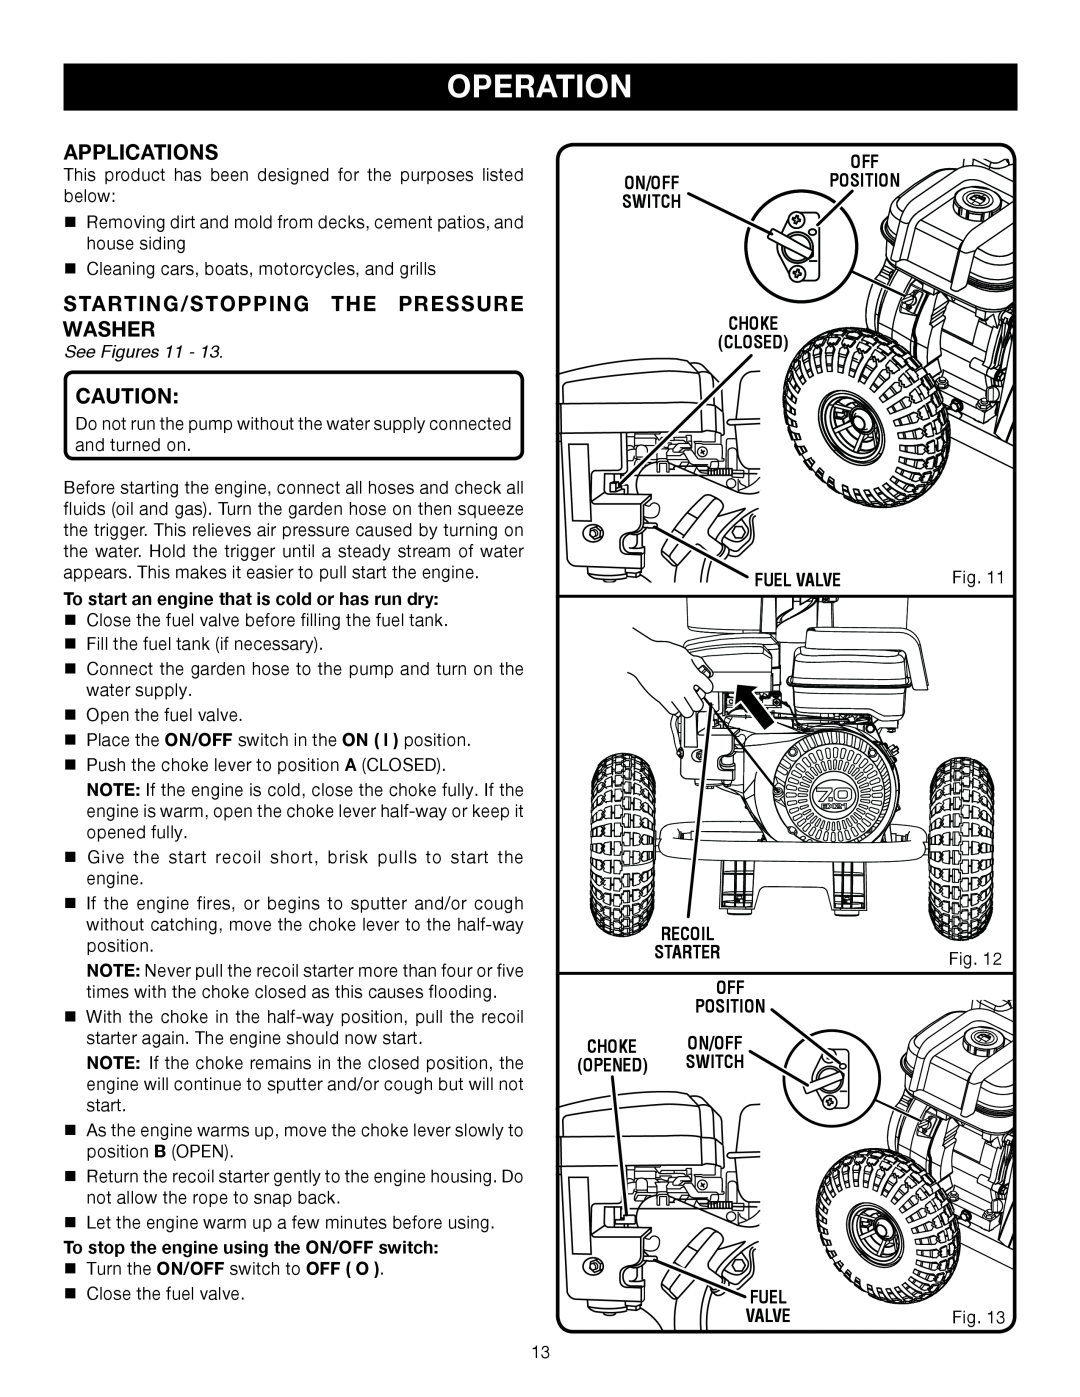 Ryobi Outdoor RY80030 manual Applications, Starting/Stopping The Pressure Washer, Operation, See Figures 11, On/Off, Switch 